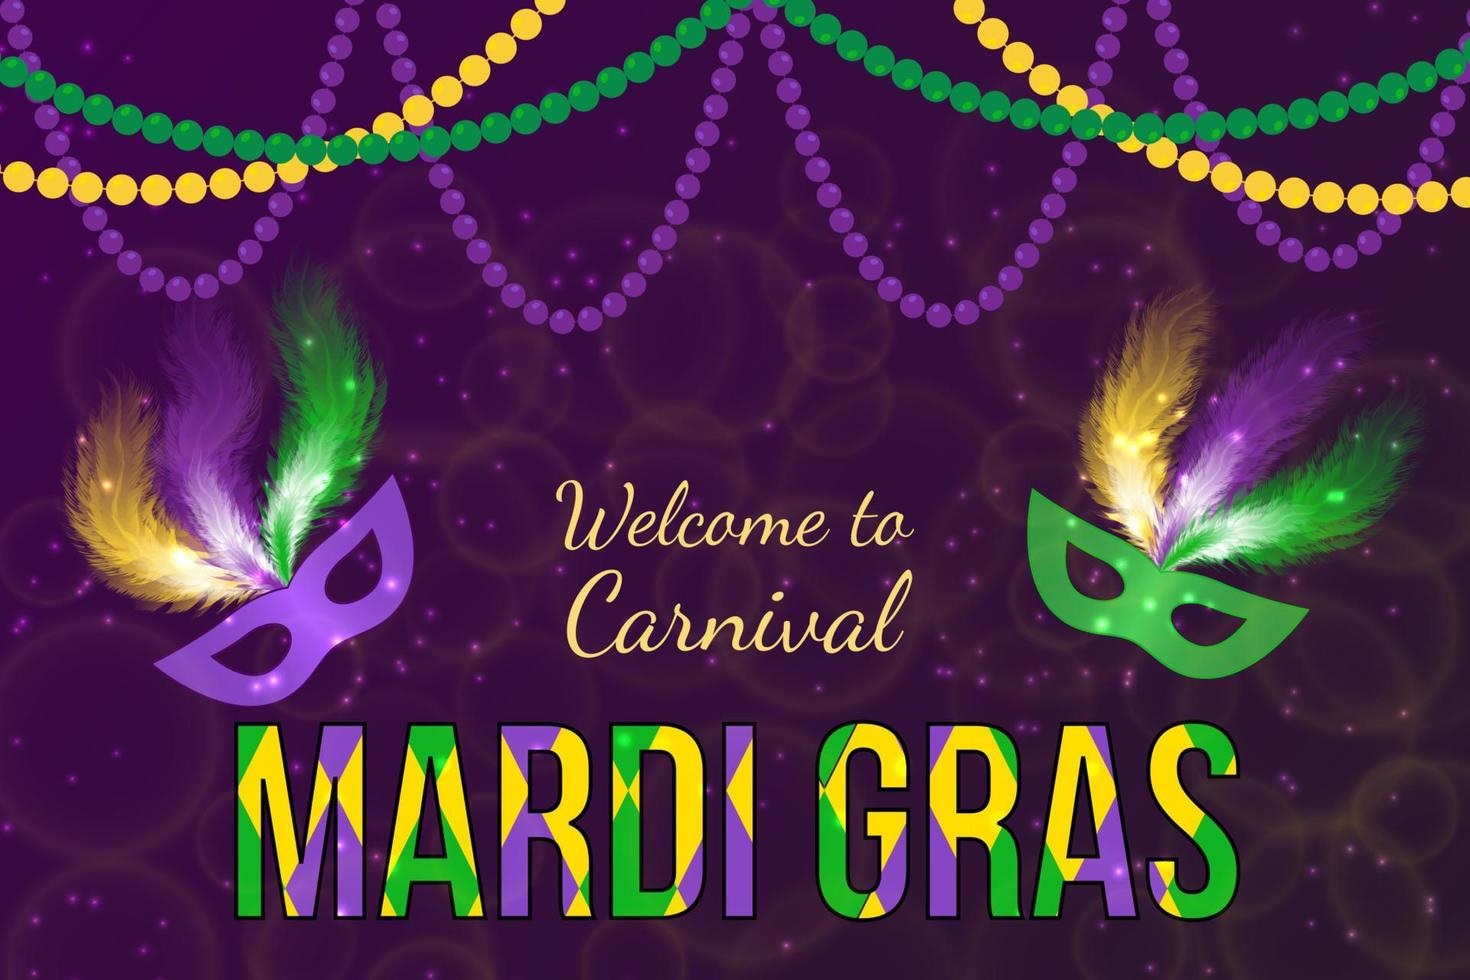 Mardi Gras carnival vector illustration with mask on dark bright background. Easy to edit design template for your projects.